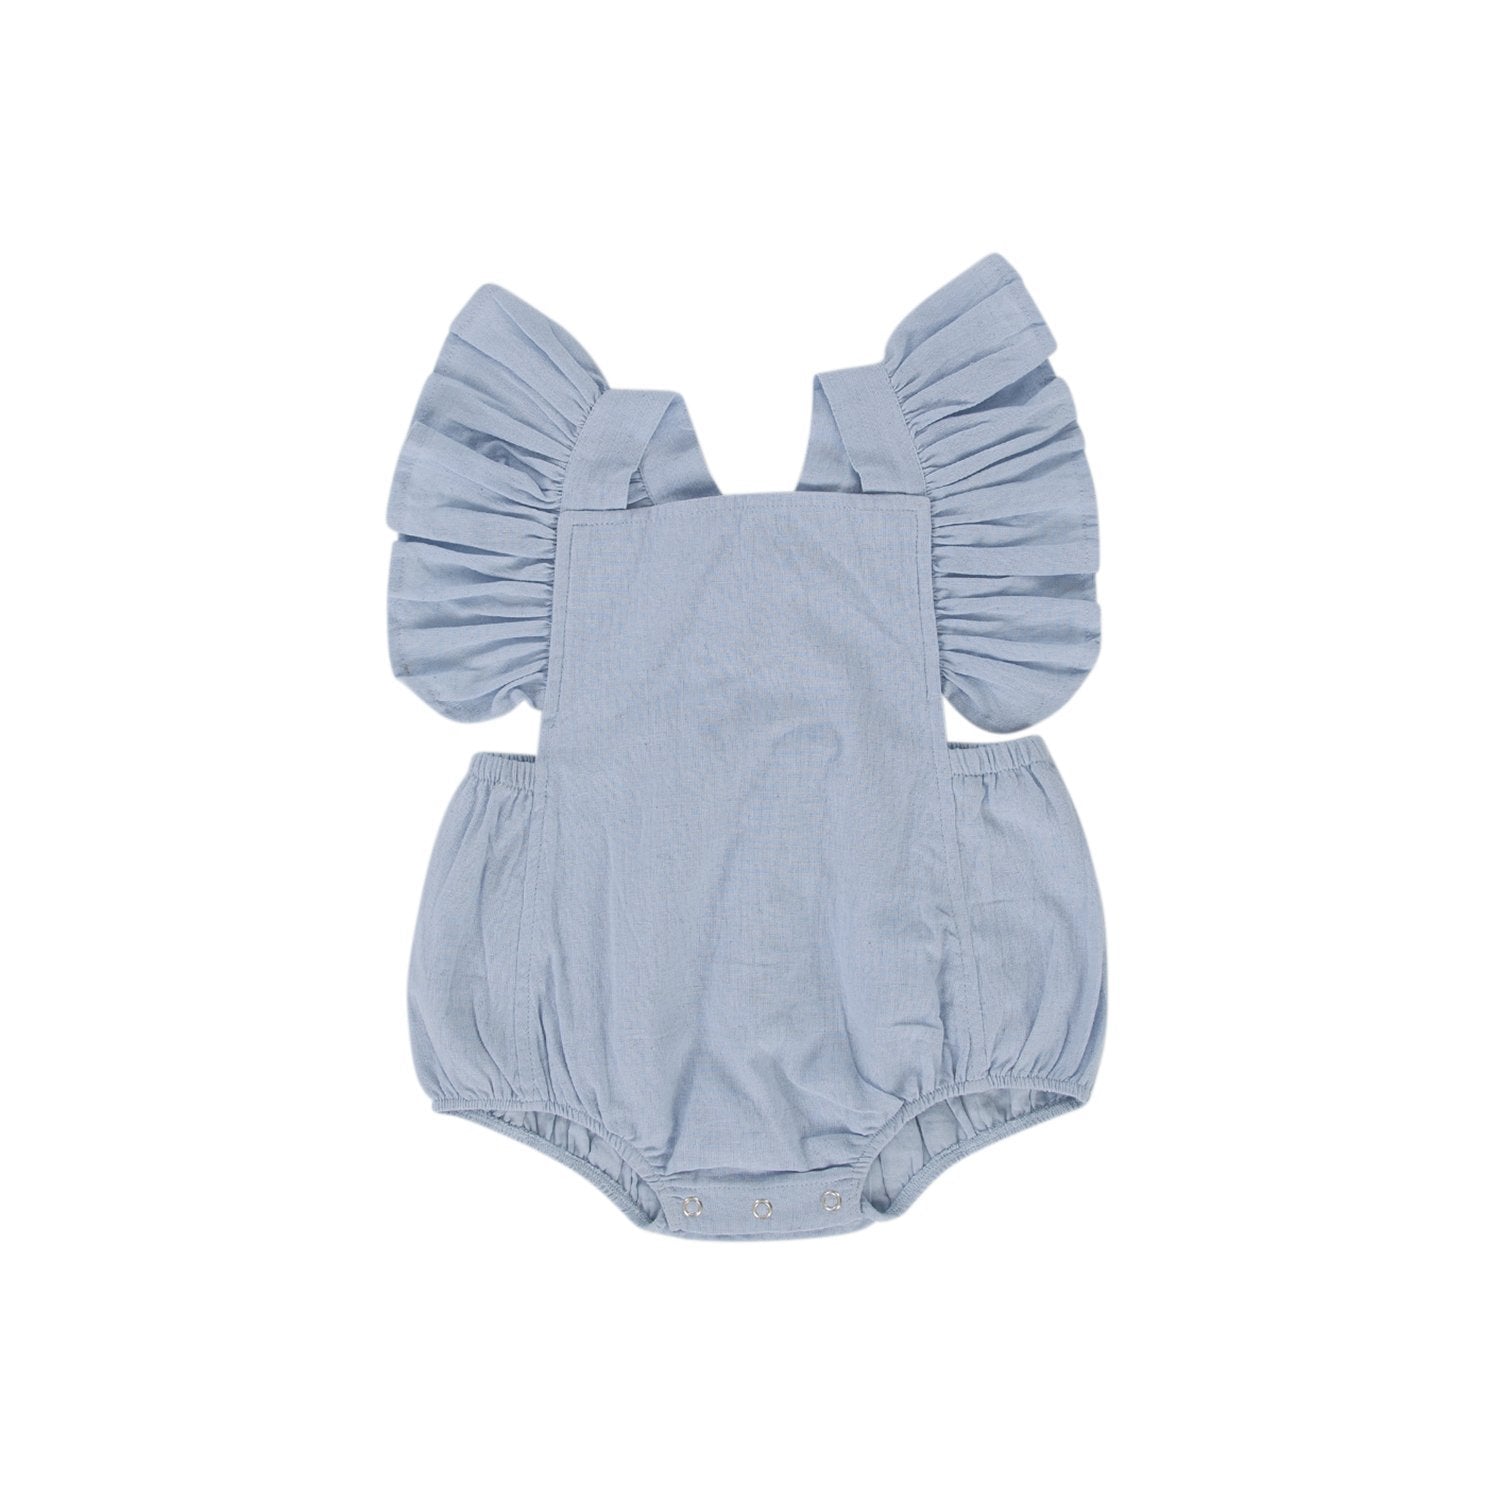 Ling Playsuit (Winter Sky)